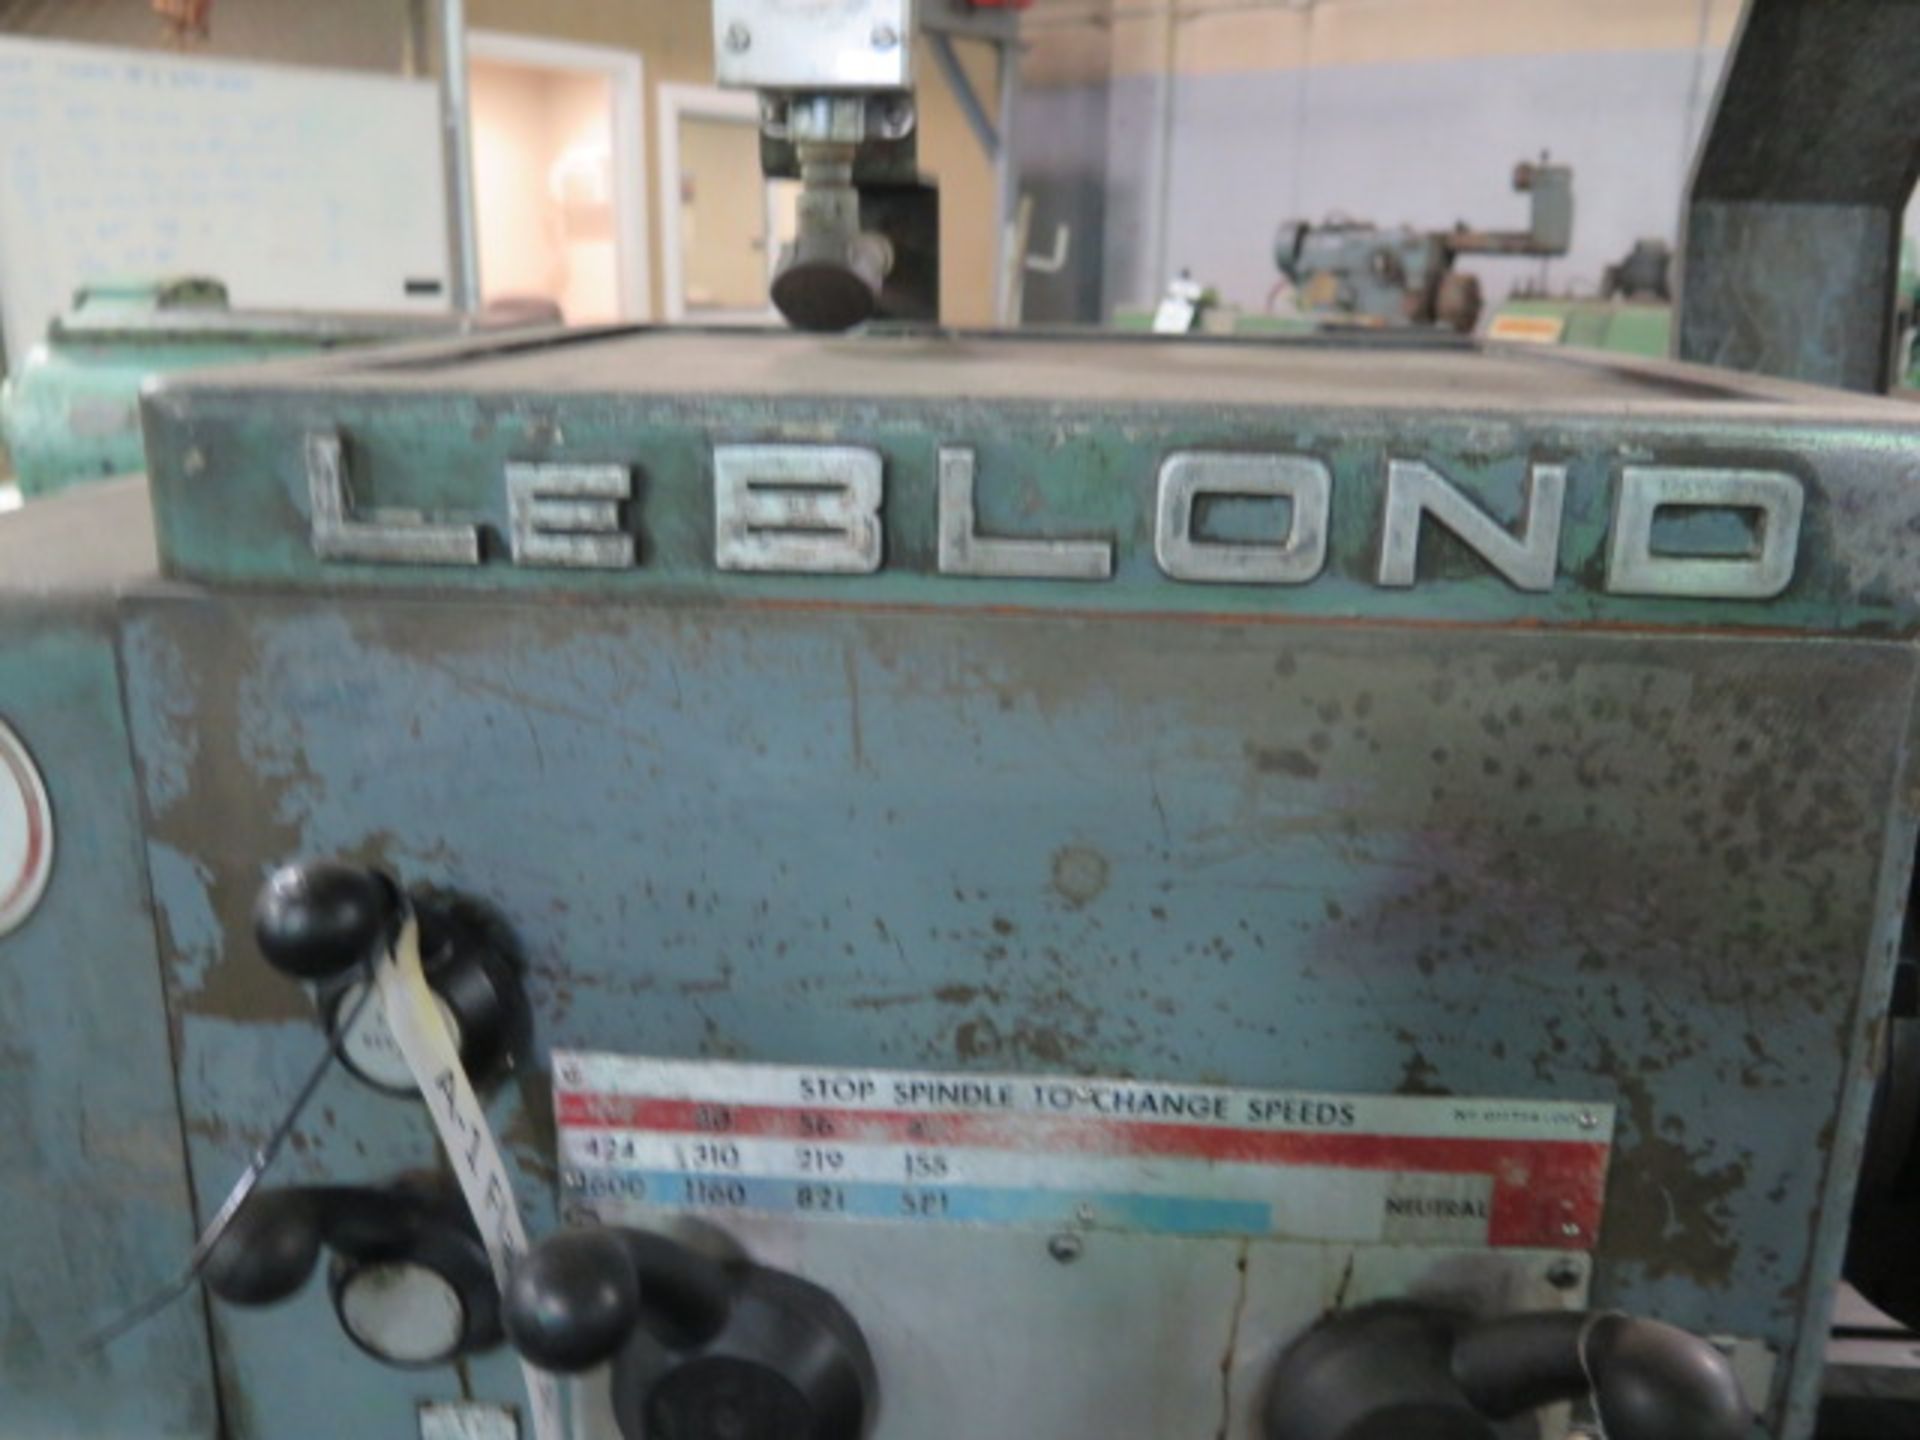 LeBlond Regal 19” x 58” Geared Head Lathe w/ 40-1600 RPM, Inch Threading, Tailstock, SOLD AS IS - Image 9 of 14